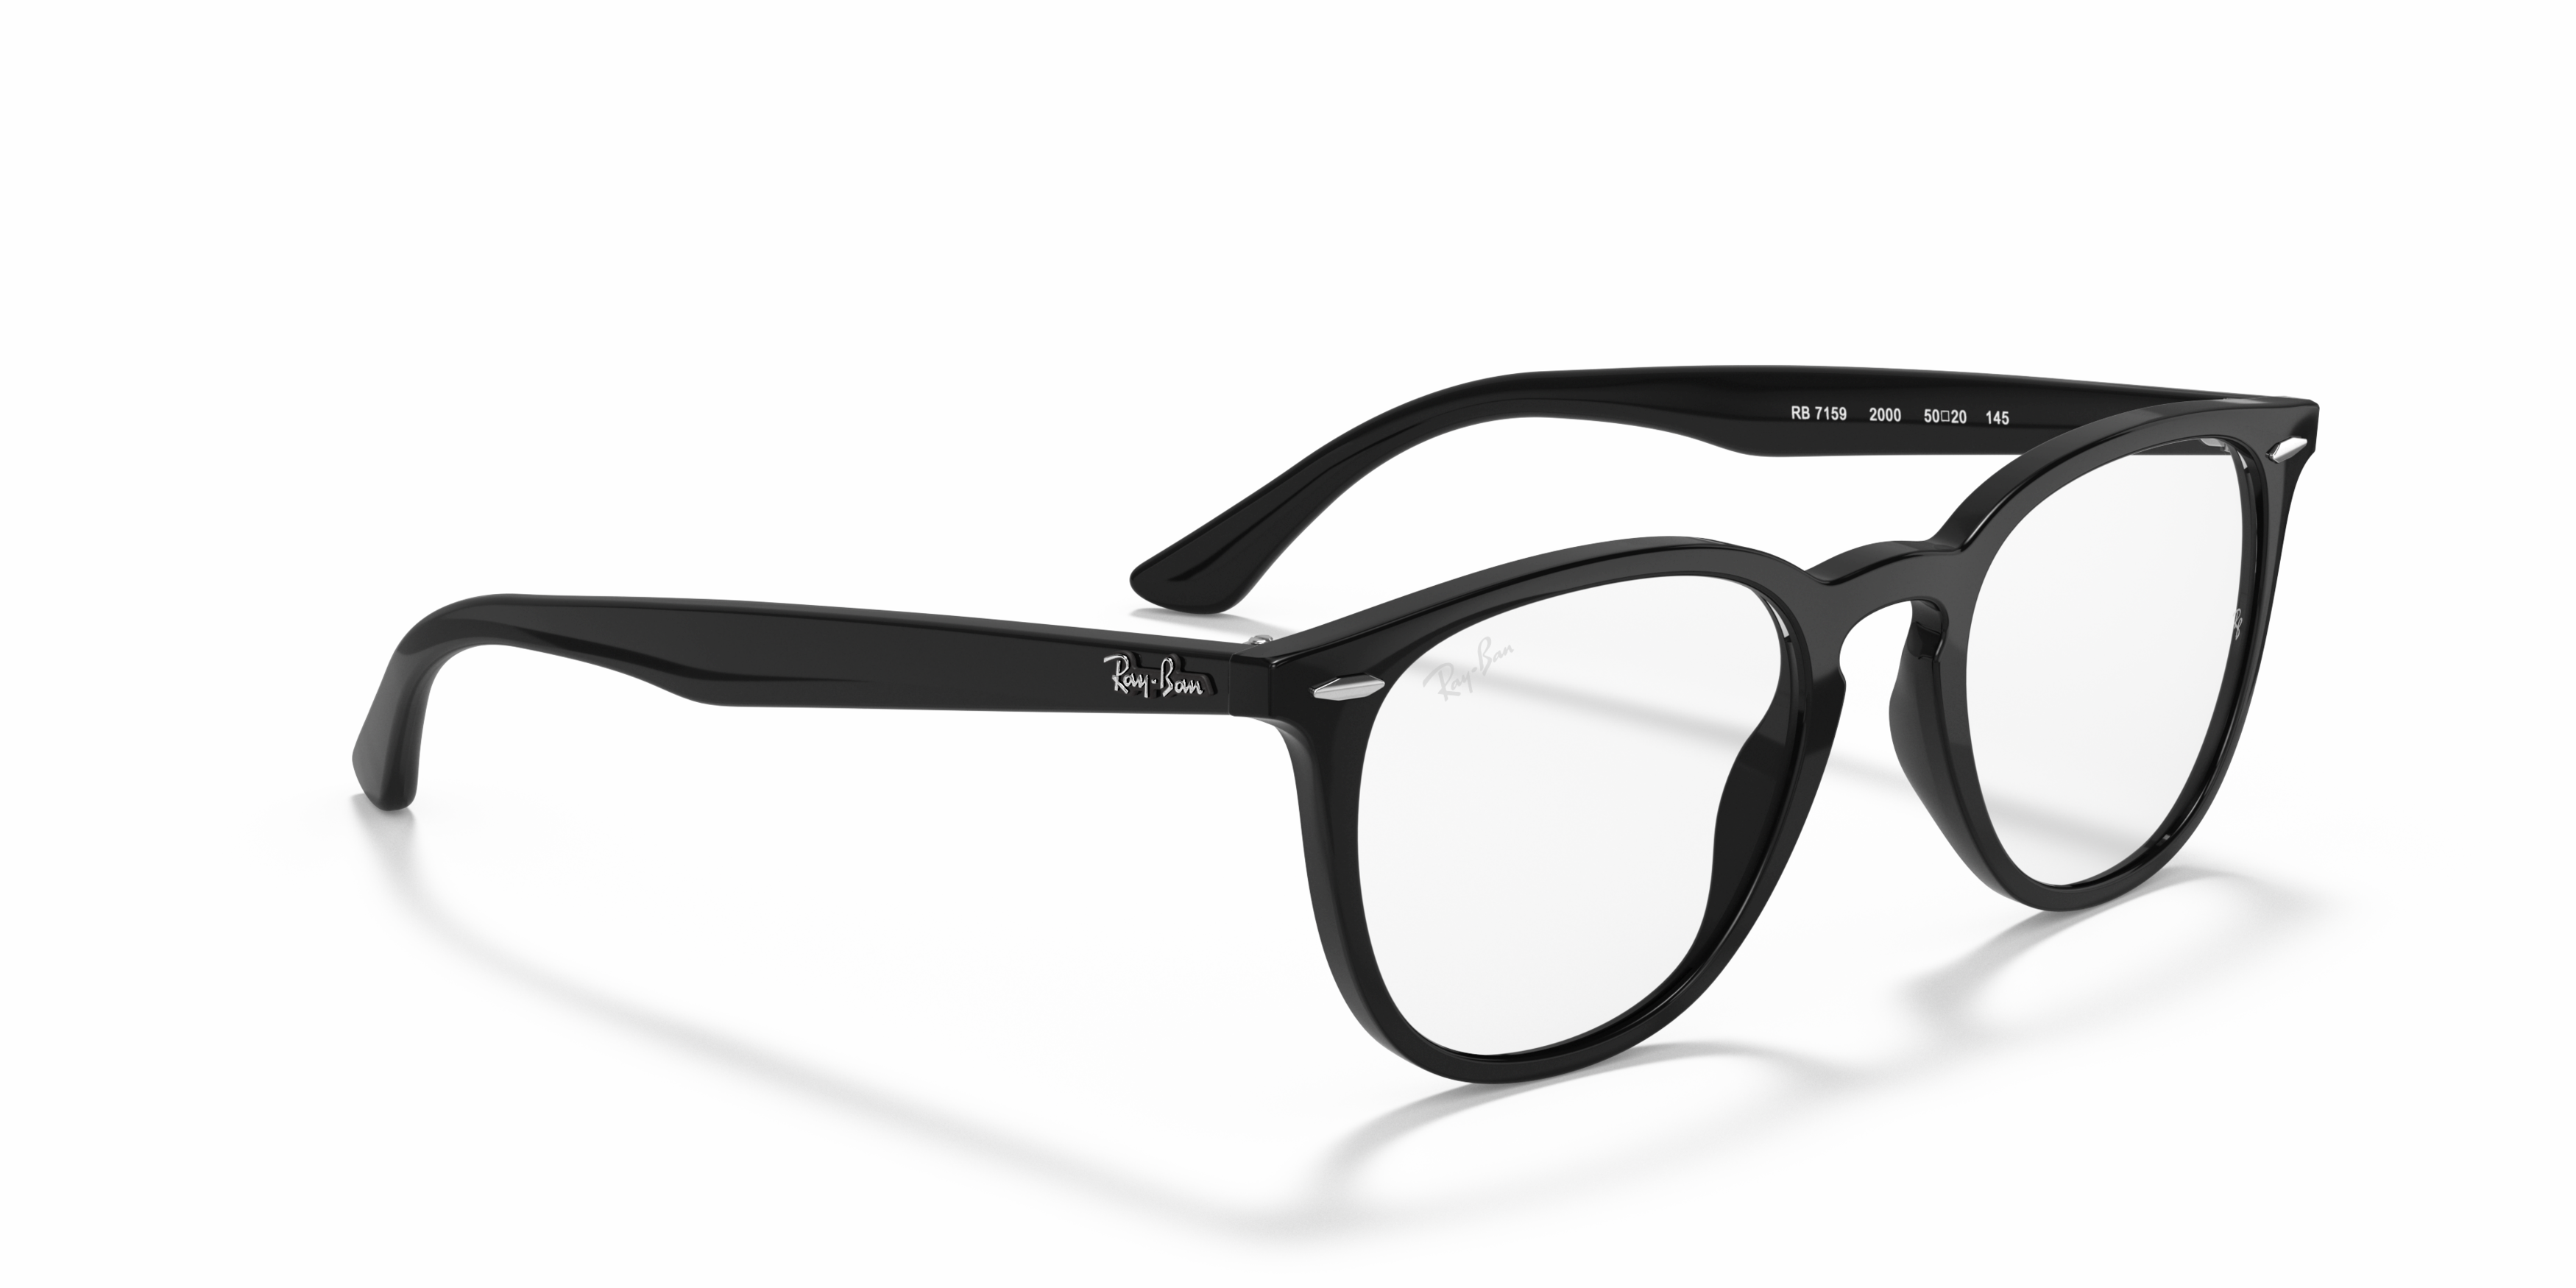 Angle_Right01 Ray-Ban RX 7159 Glasses Transparent / Black